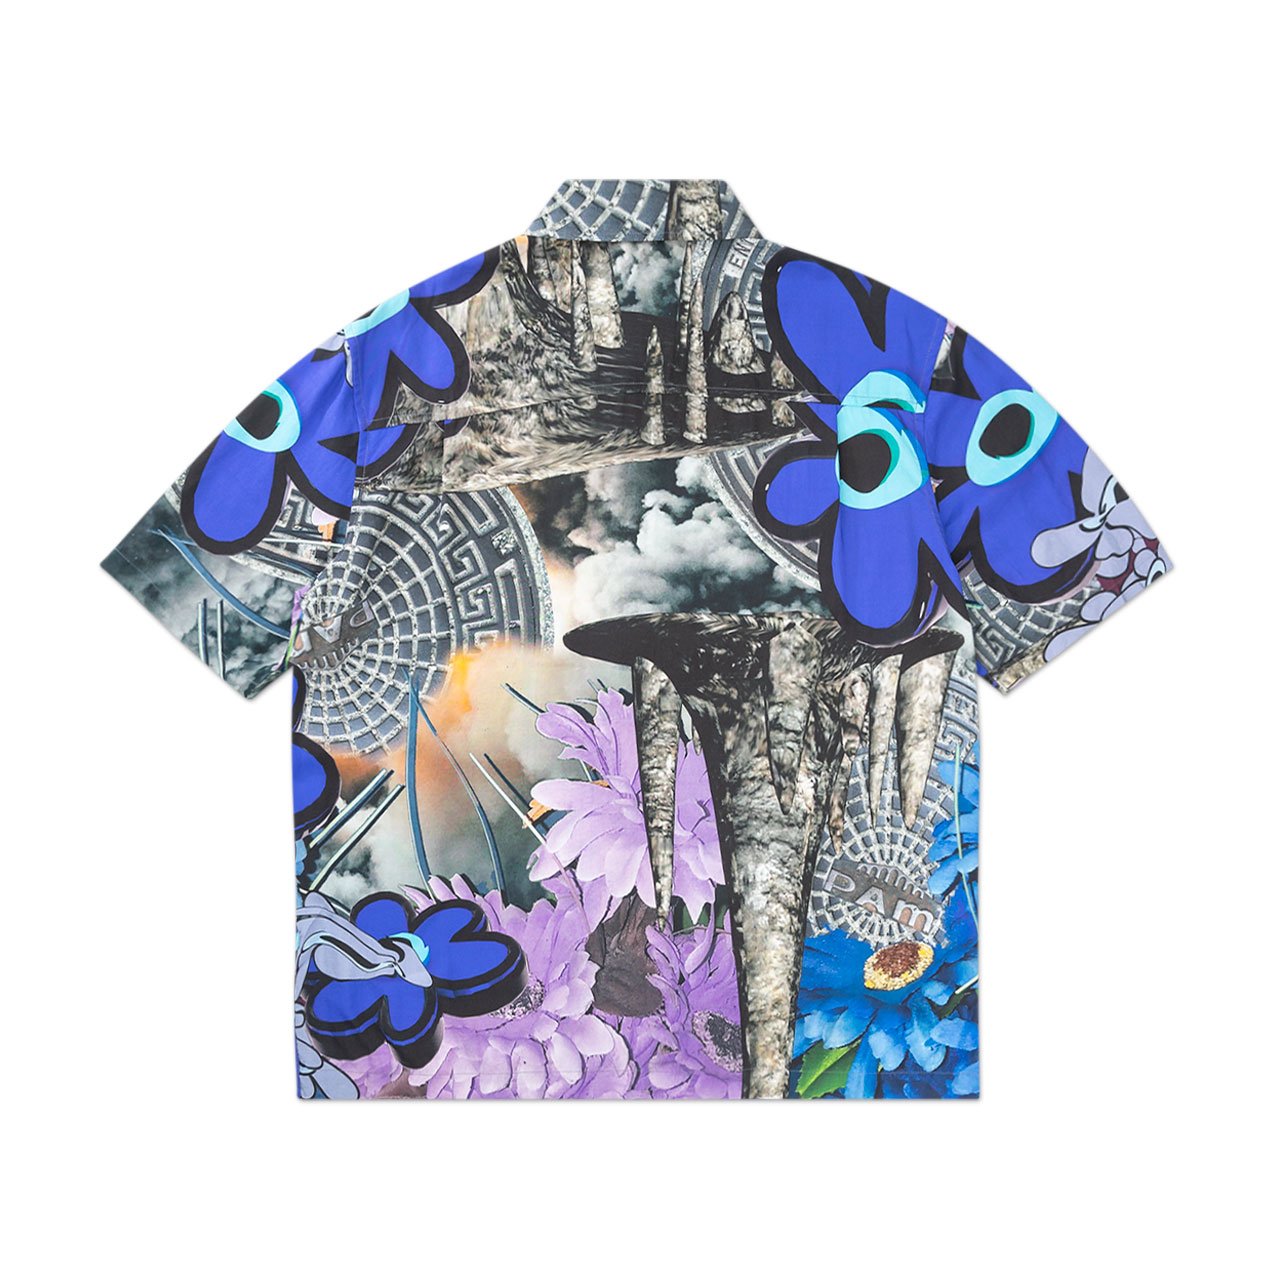 perks and mini the depths printed shirt (multi) - 3650-mlt - a.plus - Image - 2